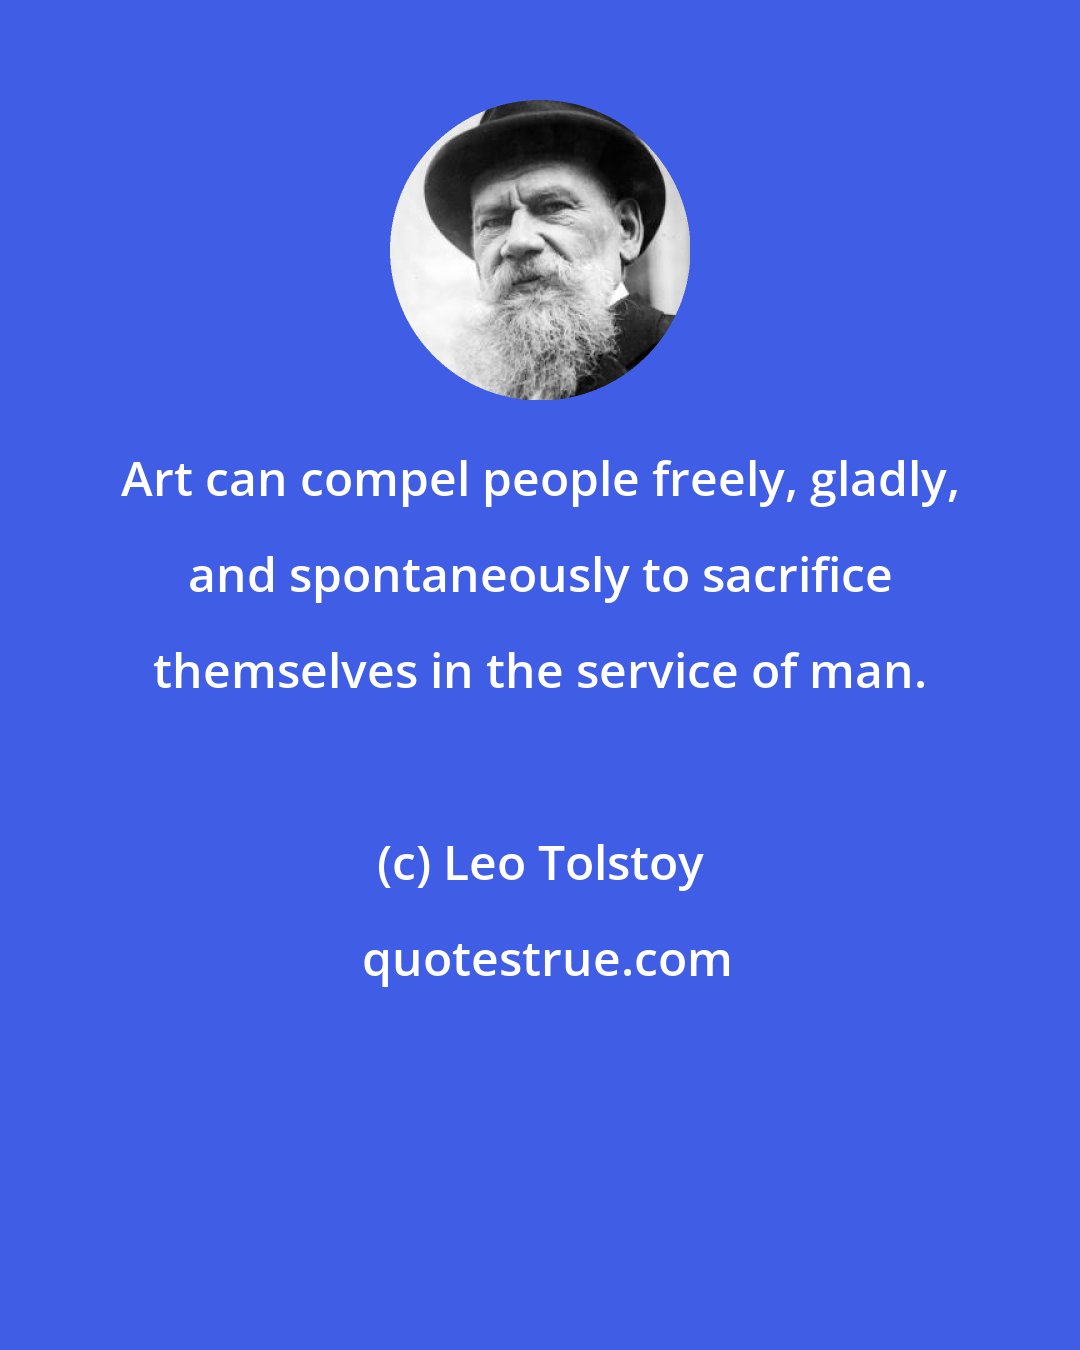 Leo Tolstoy: Art can compel people freely, gladly, and spontaneously to sacrifice themselves in the service of man.